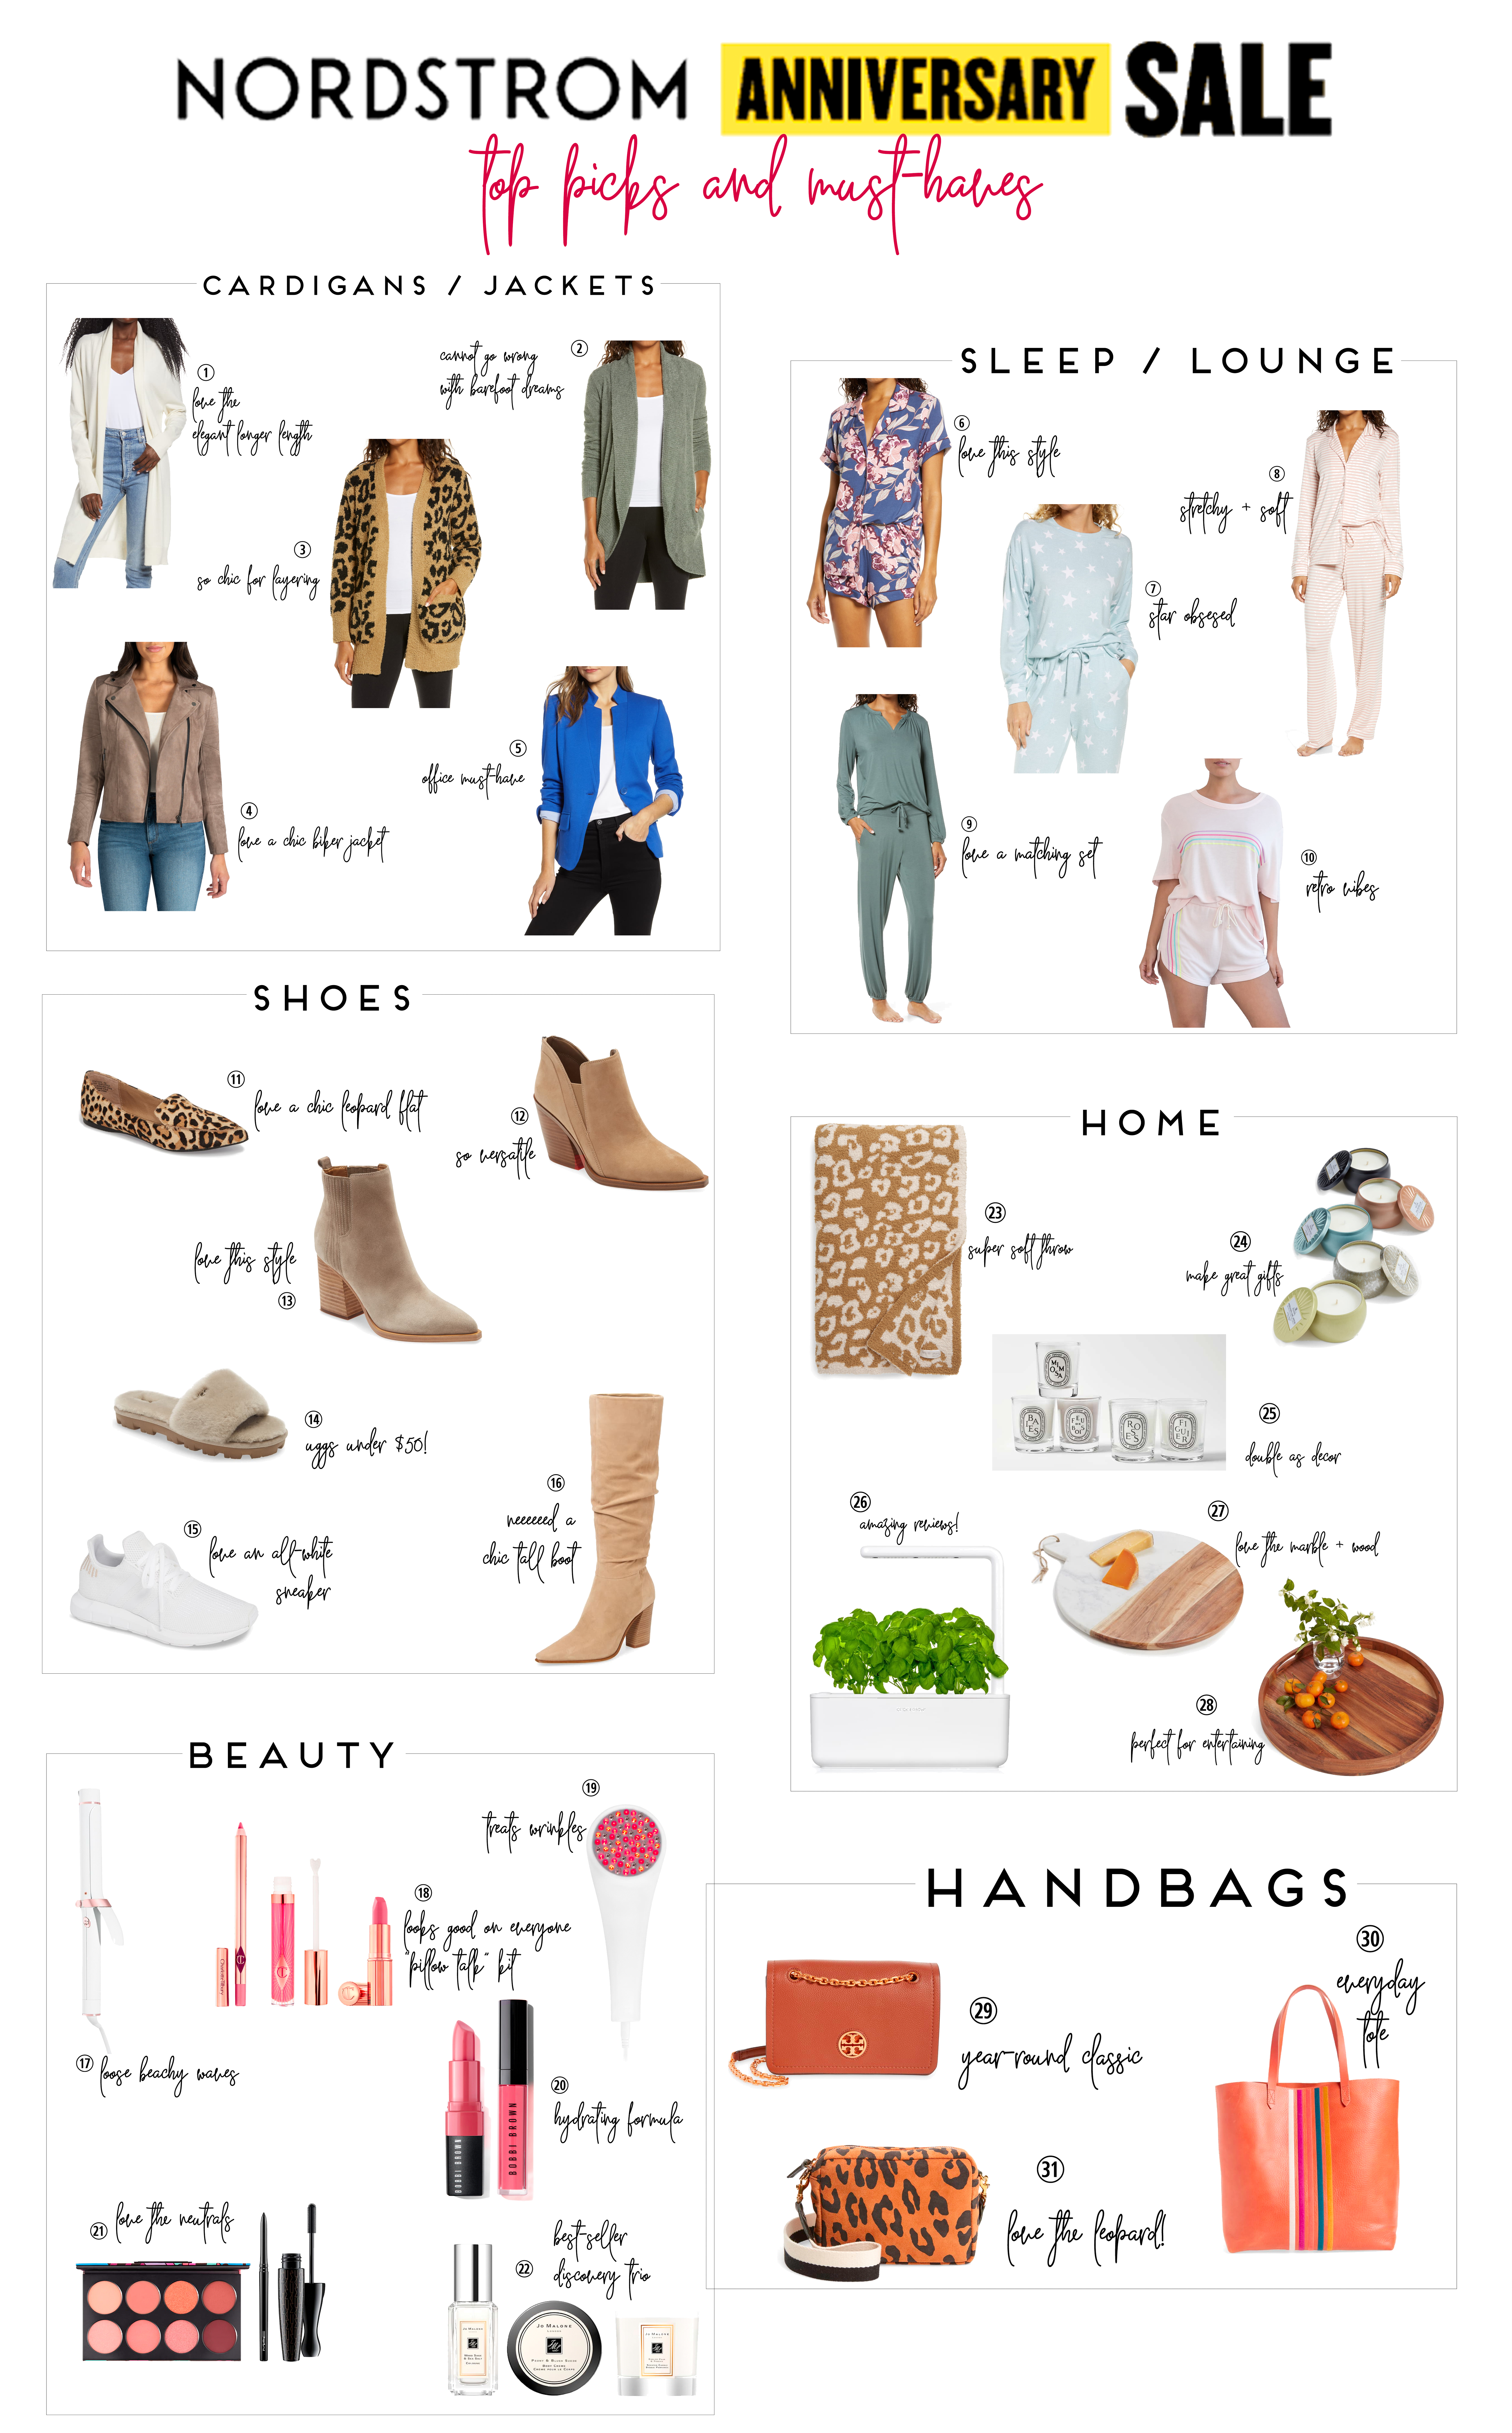 cute & little | dallas petite fashion blog | nordstrom anniversary sale 2020 | Nordstrom Anniversary Sale by popular Dallas life and style blog, Cute and Little: collage image of Nordstrom cardigans, Nordstrom Jackets, Nordstrom pajamas, Nordstrom Loungewear, Nordstrom shoes, Nordstrom home items, Nordstrom beauty, and Nordstrom handbags. 